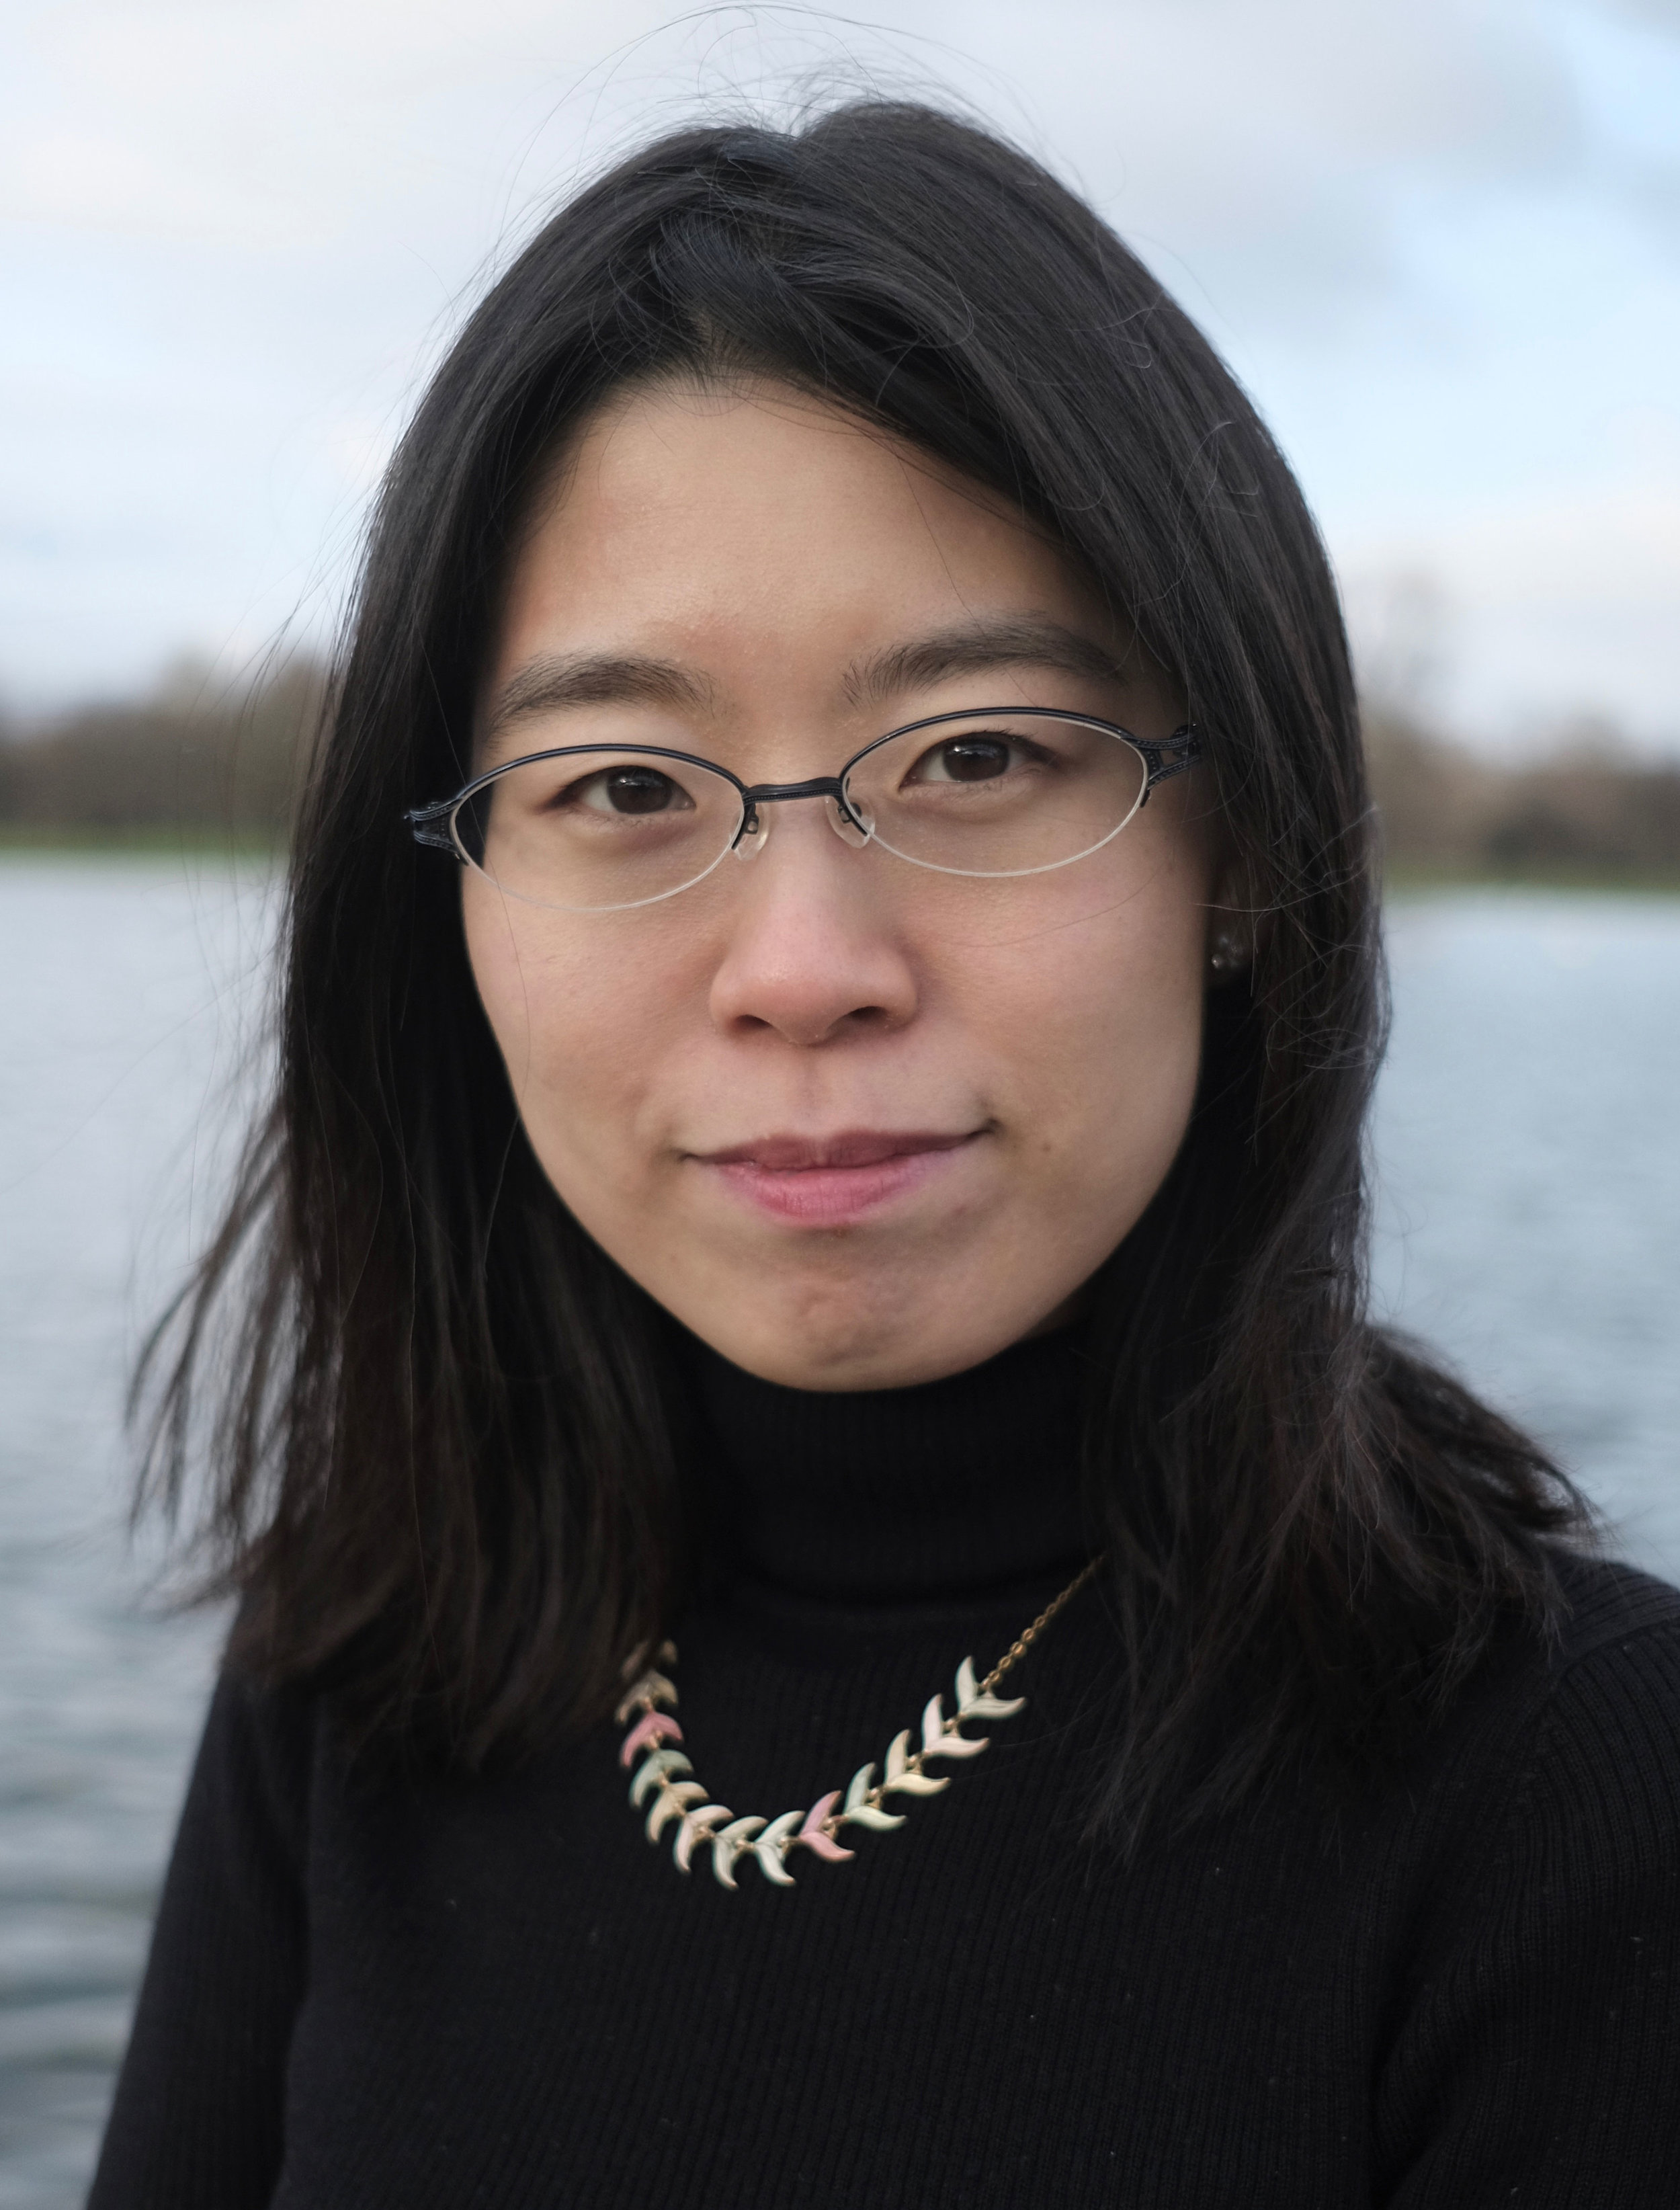 Ai FukunagaAi is a PhD candidate at SOAS, University of London. Her dissertation explores the transnational process of creating values in Japanese ceramic collections. Ai took part in the 14th EAJS PhD Workshop 2018 in Belgrade, Serbia.